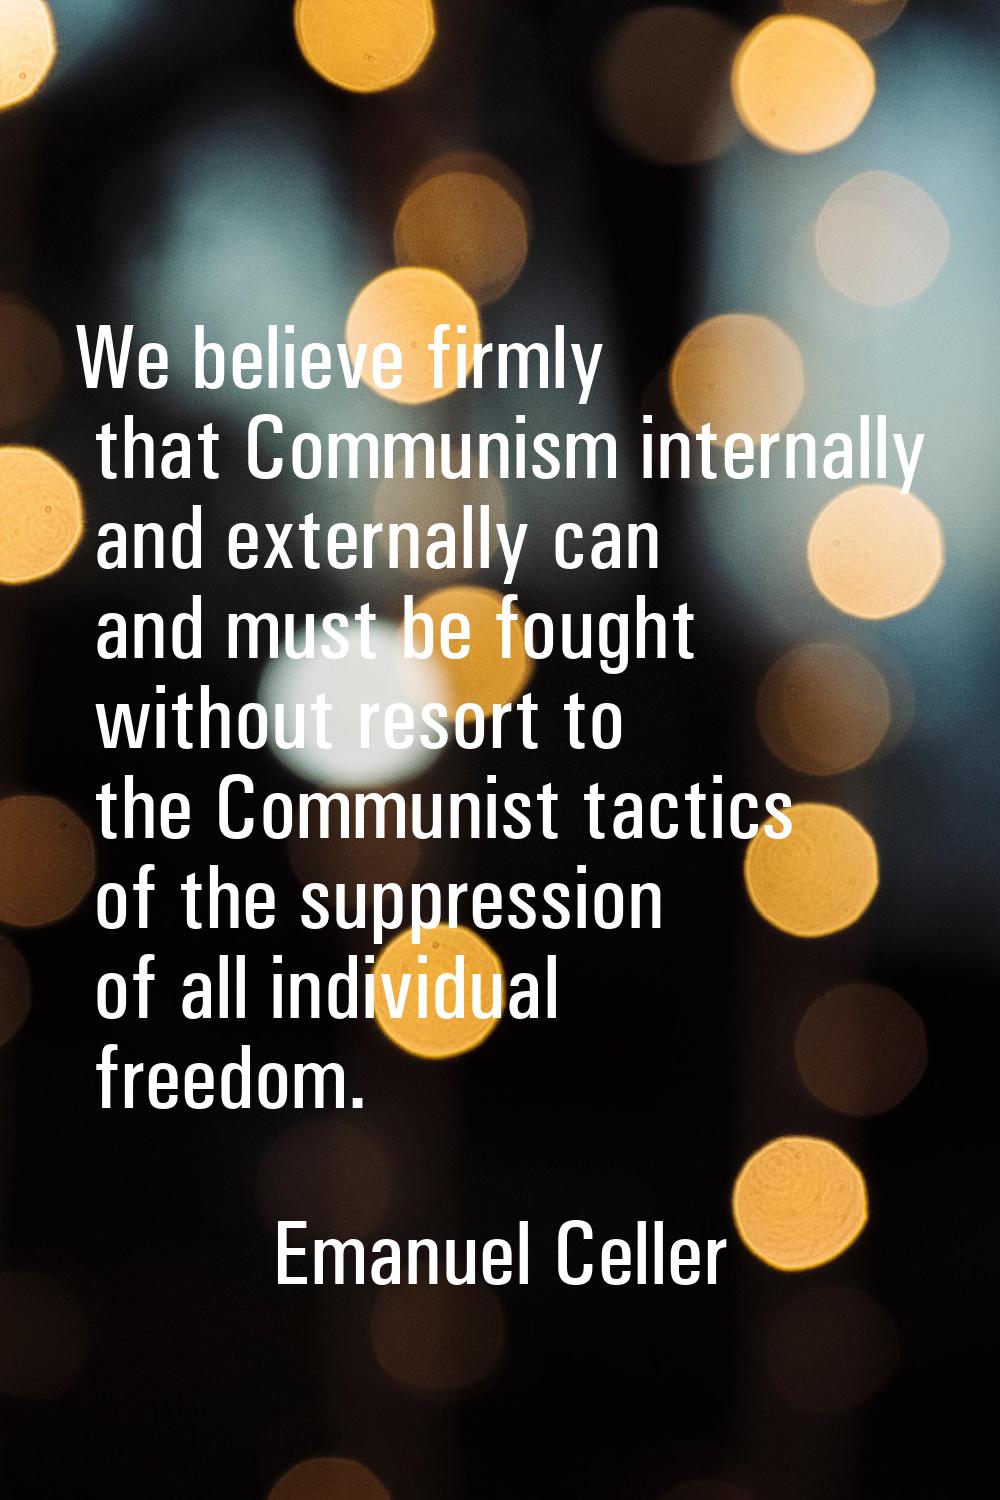 We believe firmly that Communism internally and externally can and must be fought without resort to